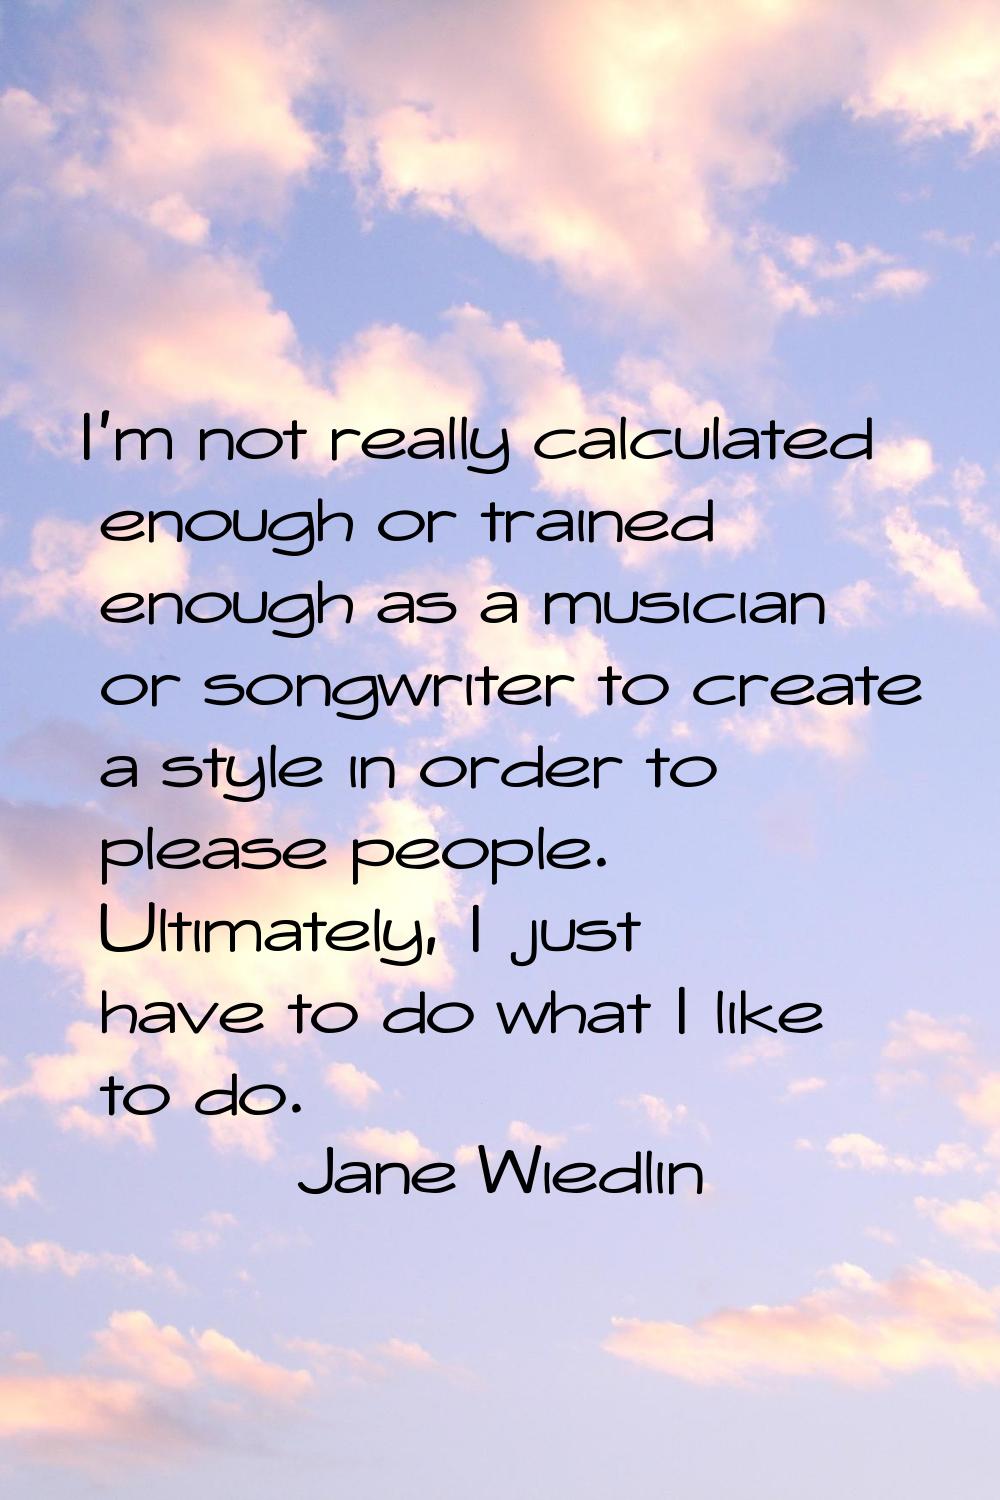 I'm not really calculated enough or trained enough as a musician or songwriter to create a style in